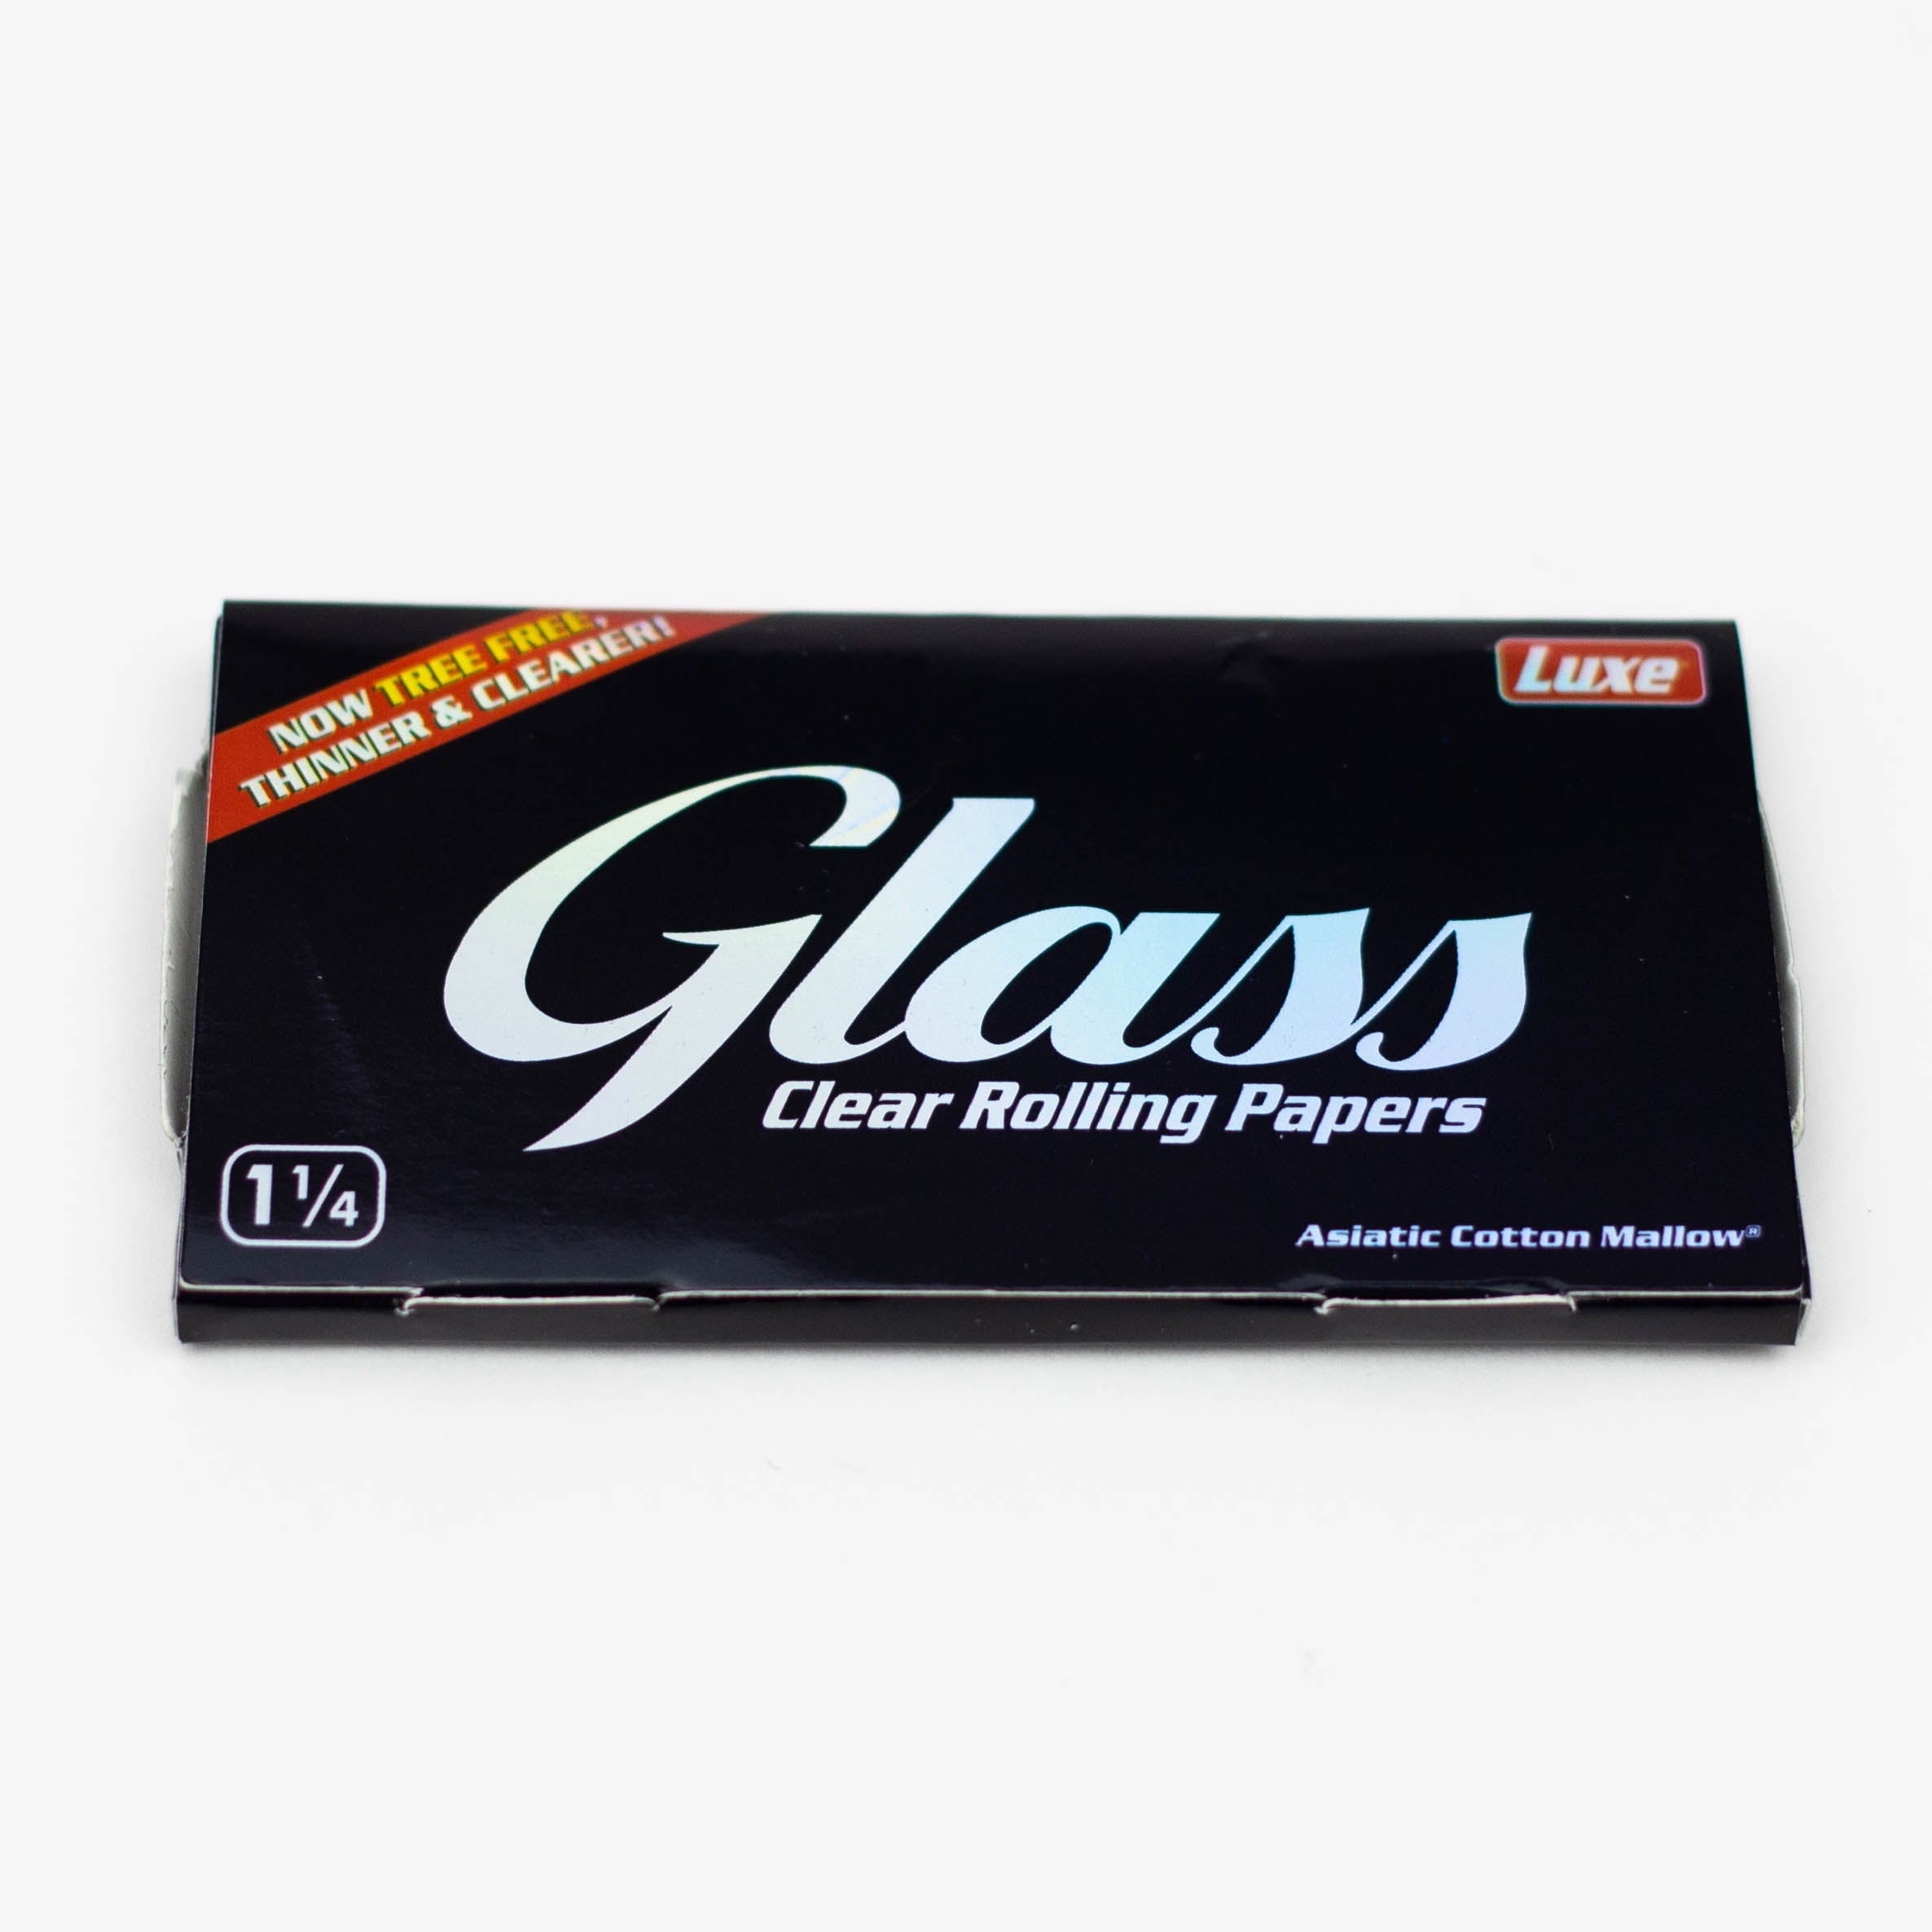 Glass Clear Luxe Cellulose papers 1 1/4_2